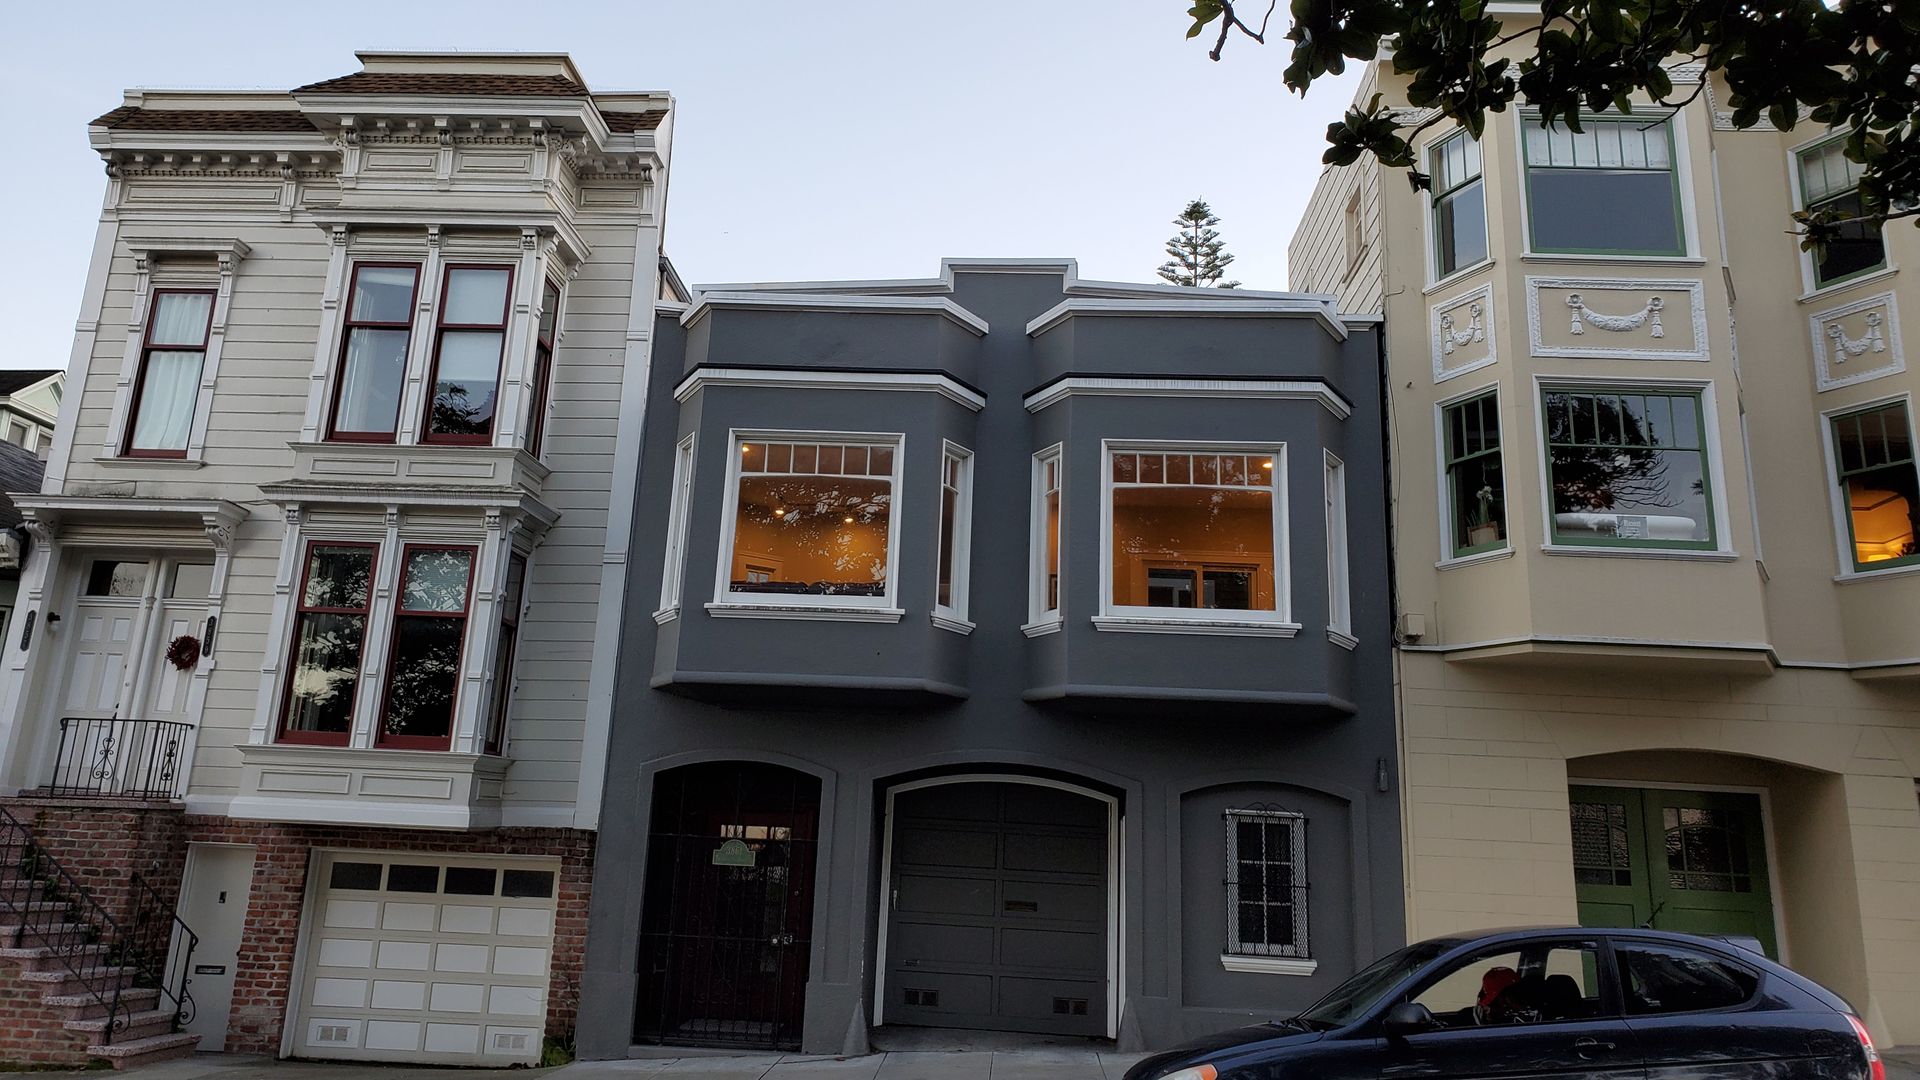 Houses in the Mission